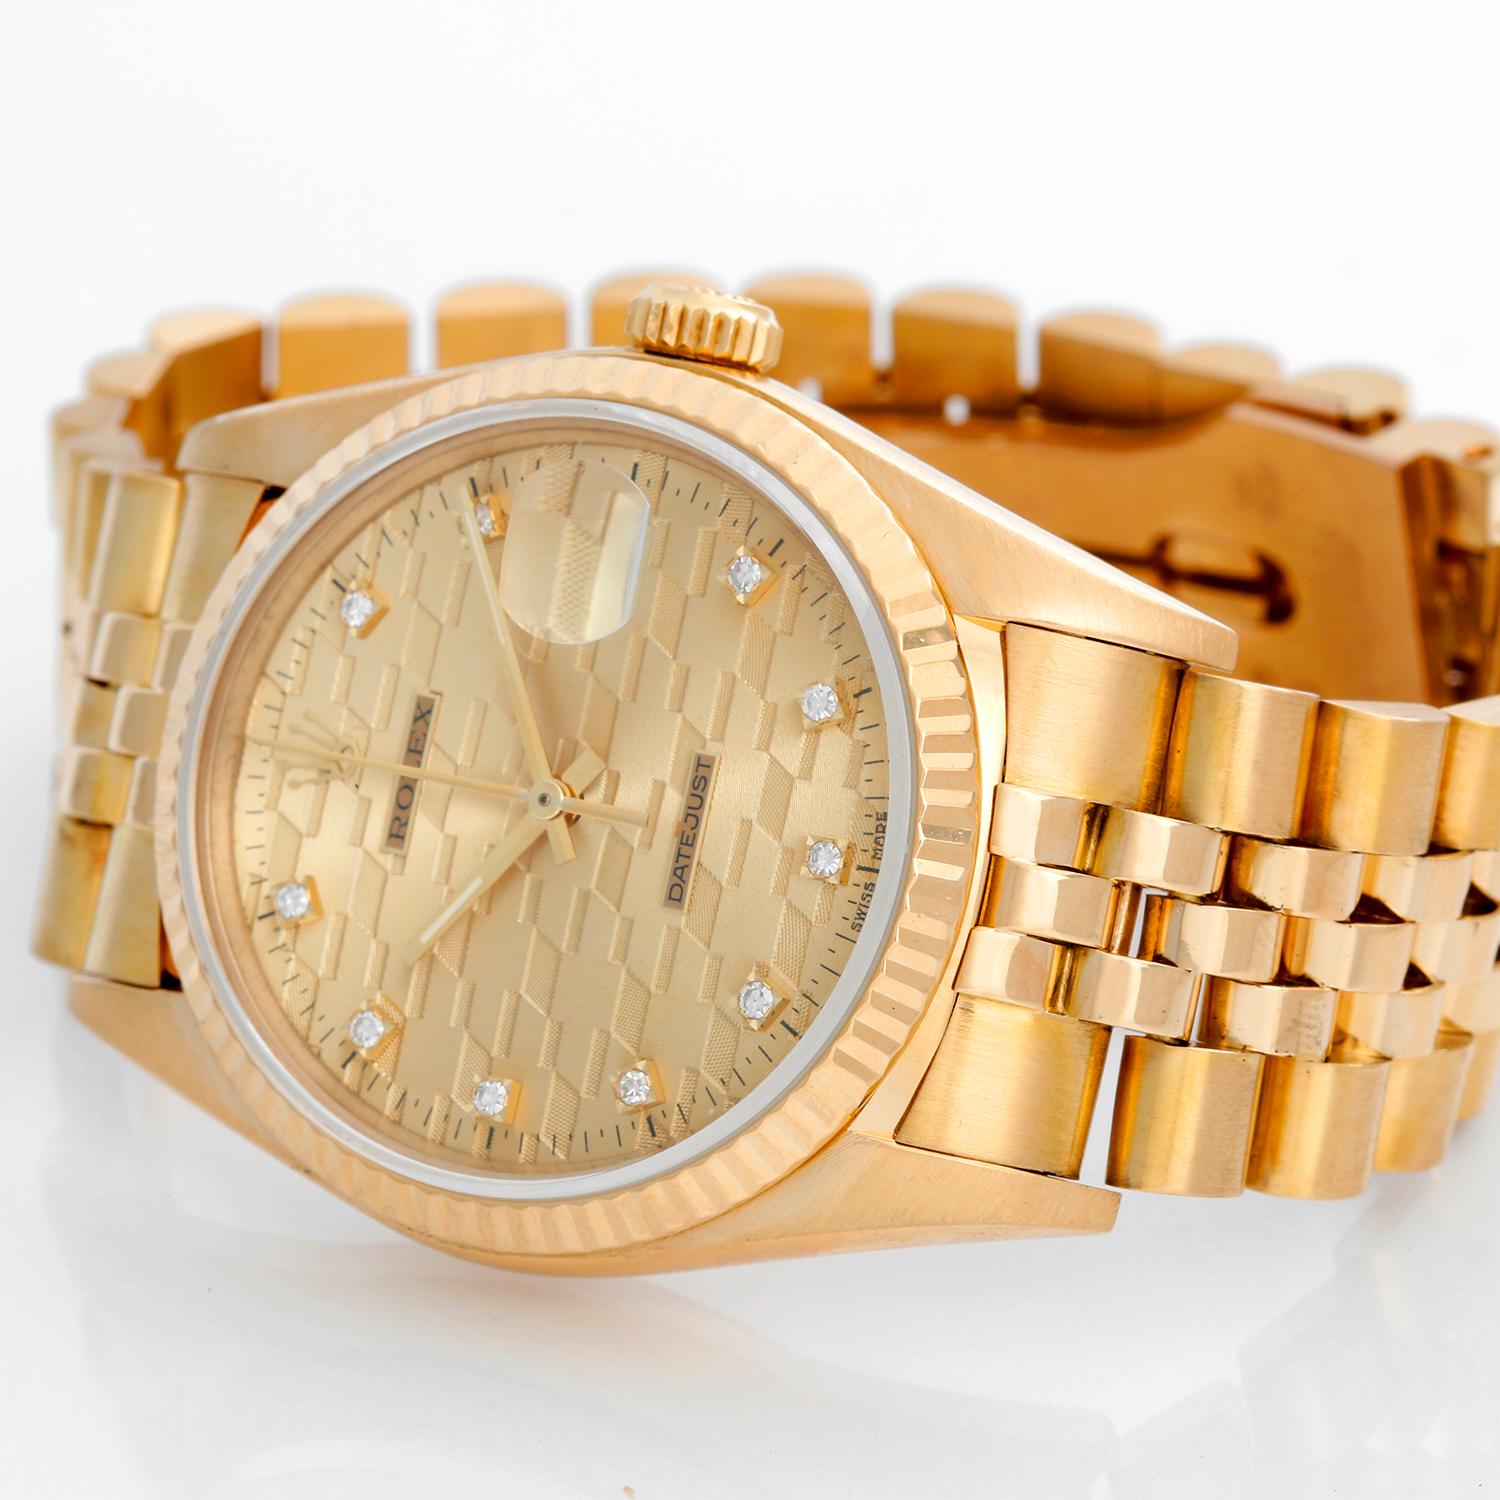 Rolex Datejust Men's 18k Chevrolet Diamond Jubilee Watch - Automatic winding, Quickset, sapphire crystal. 18k yellow gold case with fluted bezel (36mm diameter). Rolex special champagne diamond dial with the Chevy logo embossed throughout. 18k